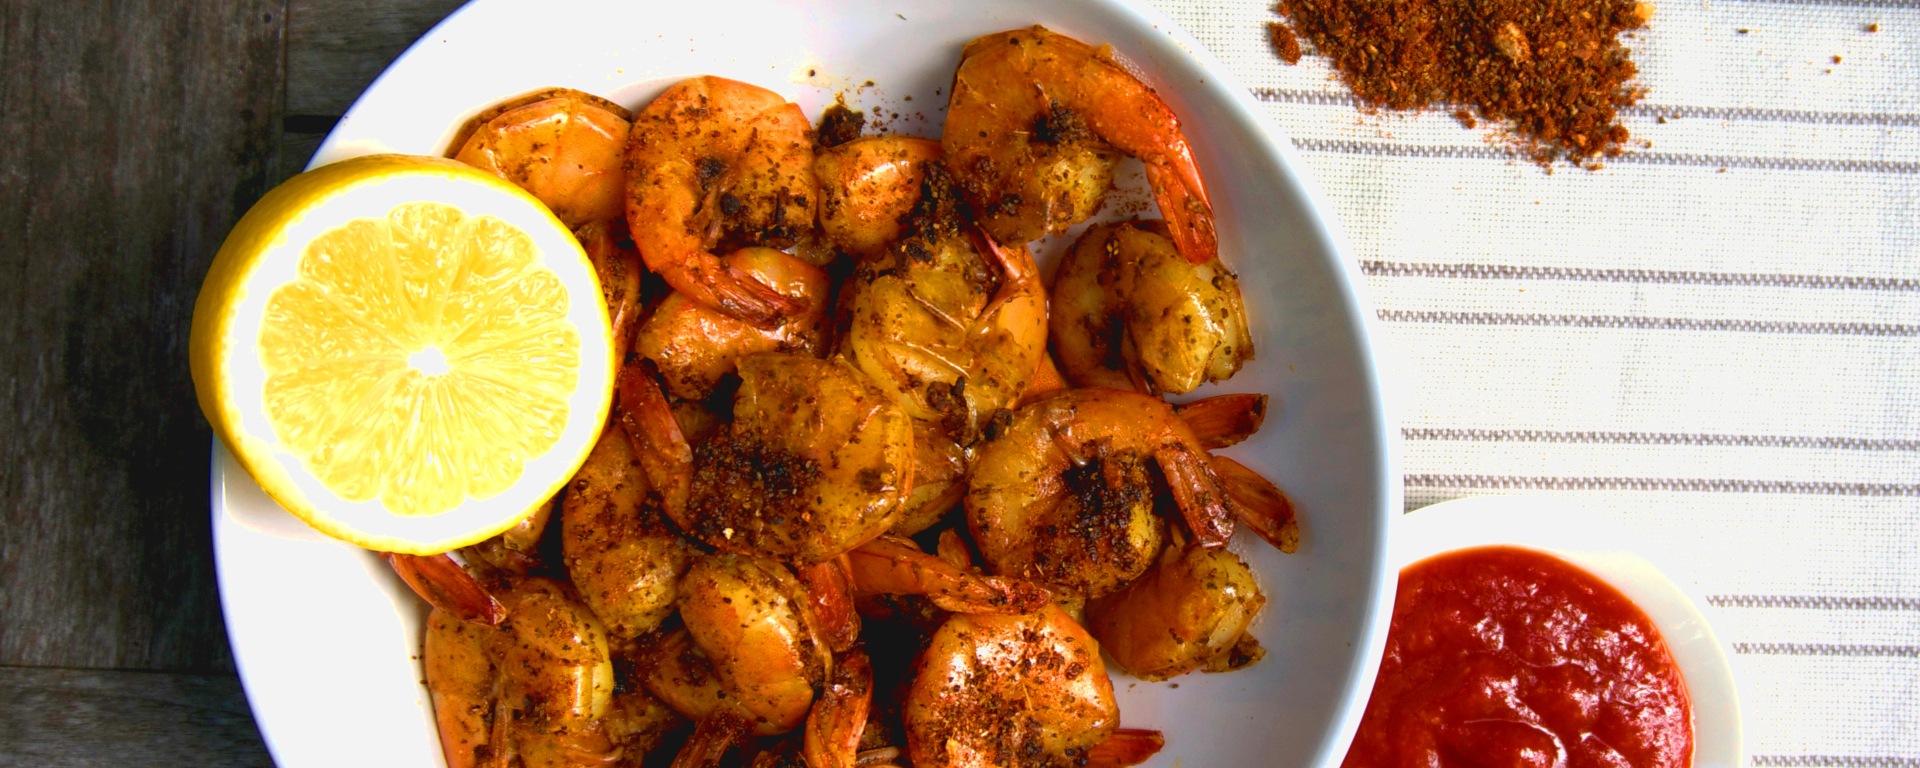 Grilled Shrimp with Baltimore Bay Spices, Garlic and Lemon